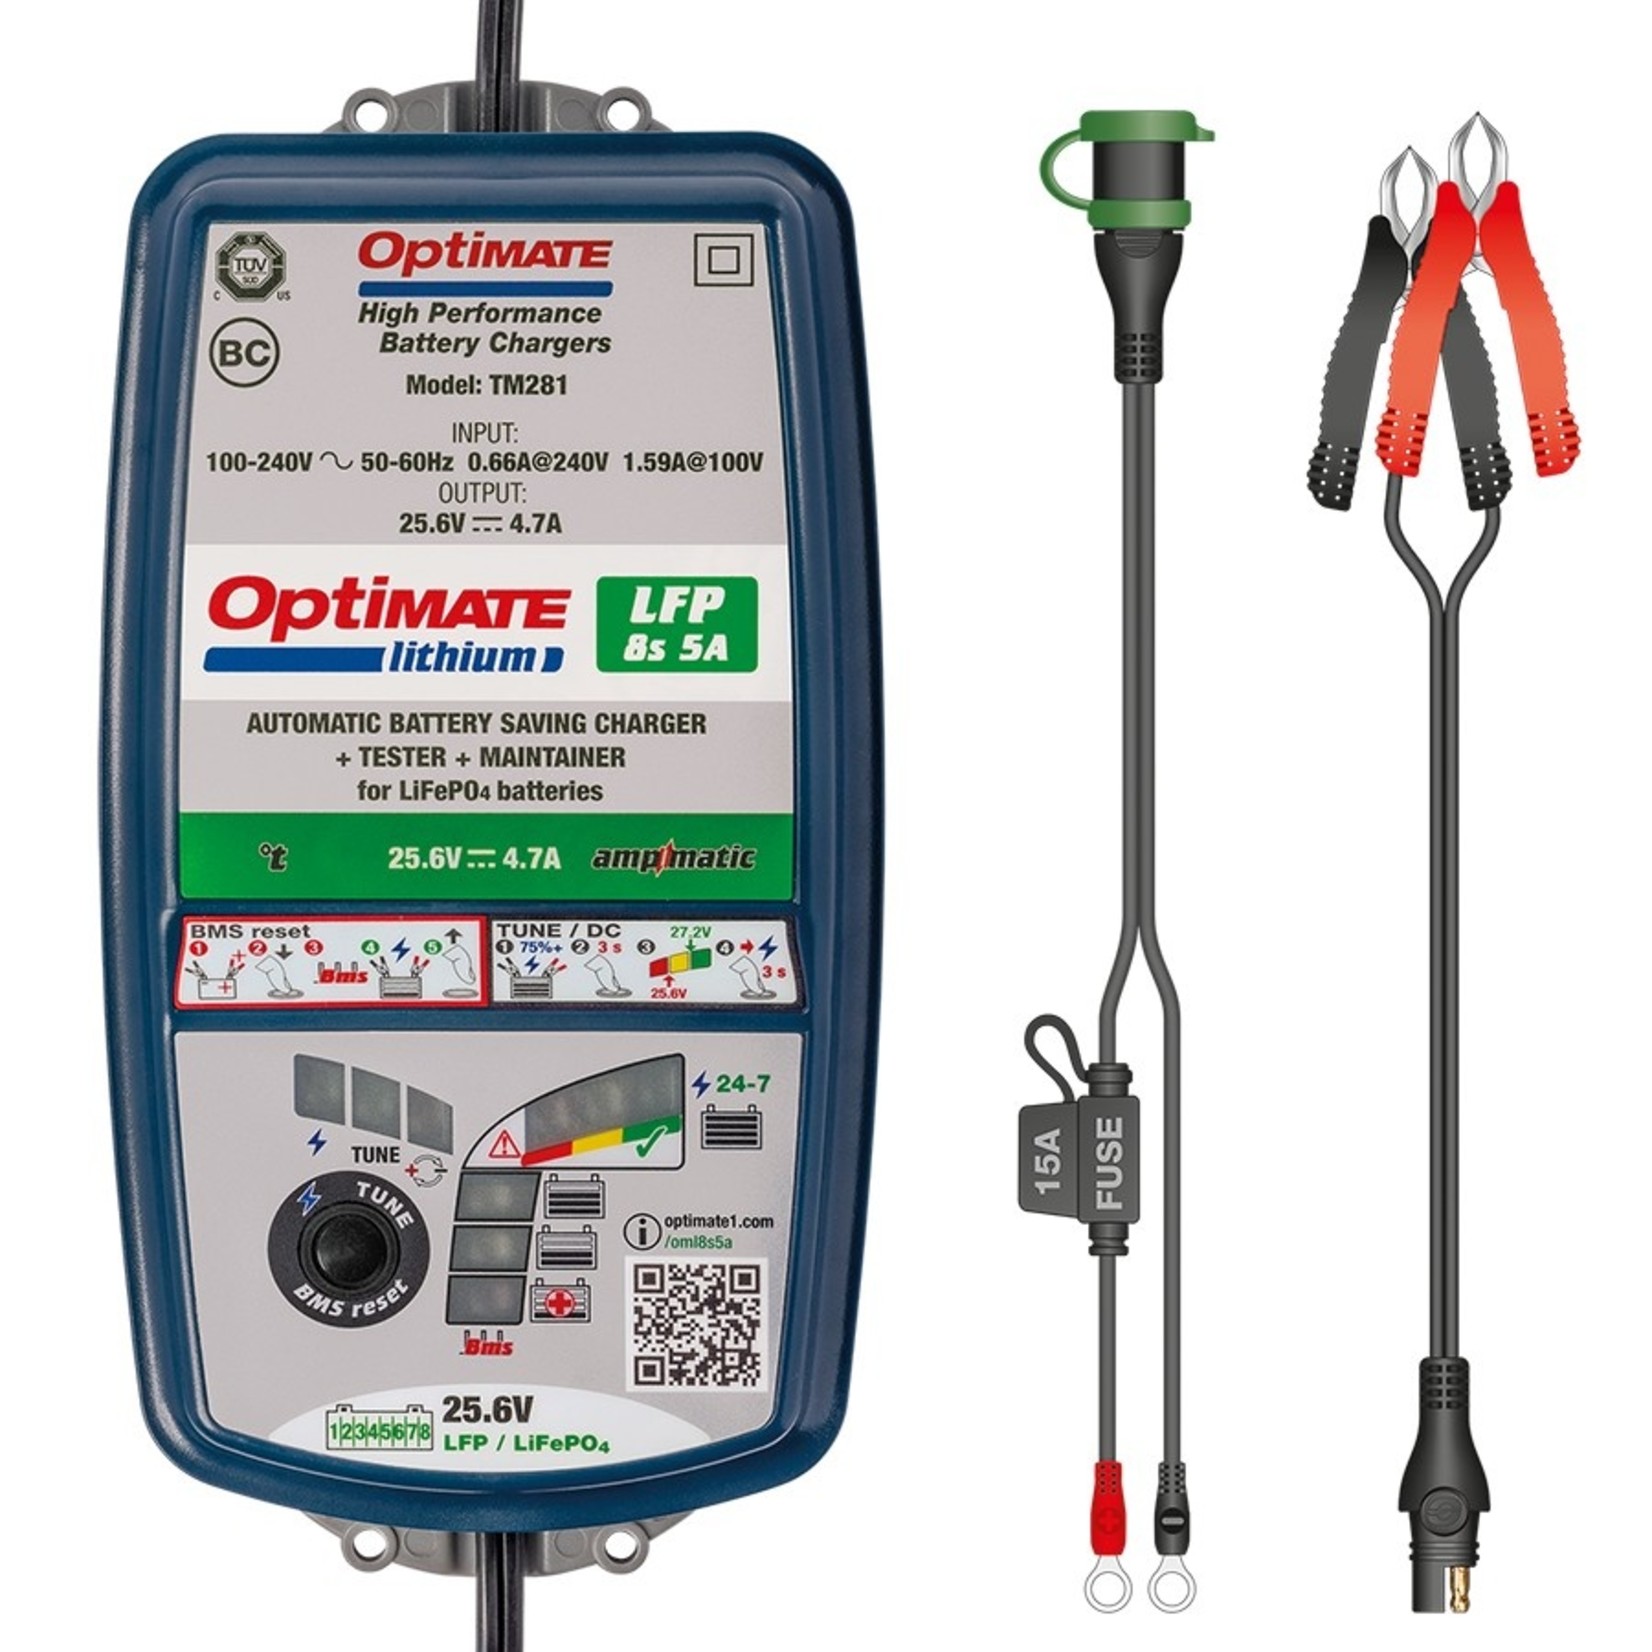 OptiMate OptiMate Lithium 8s 5A - Acculader